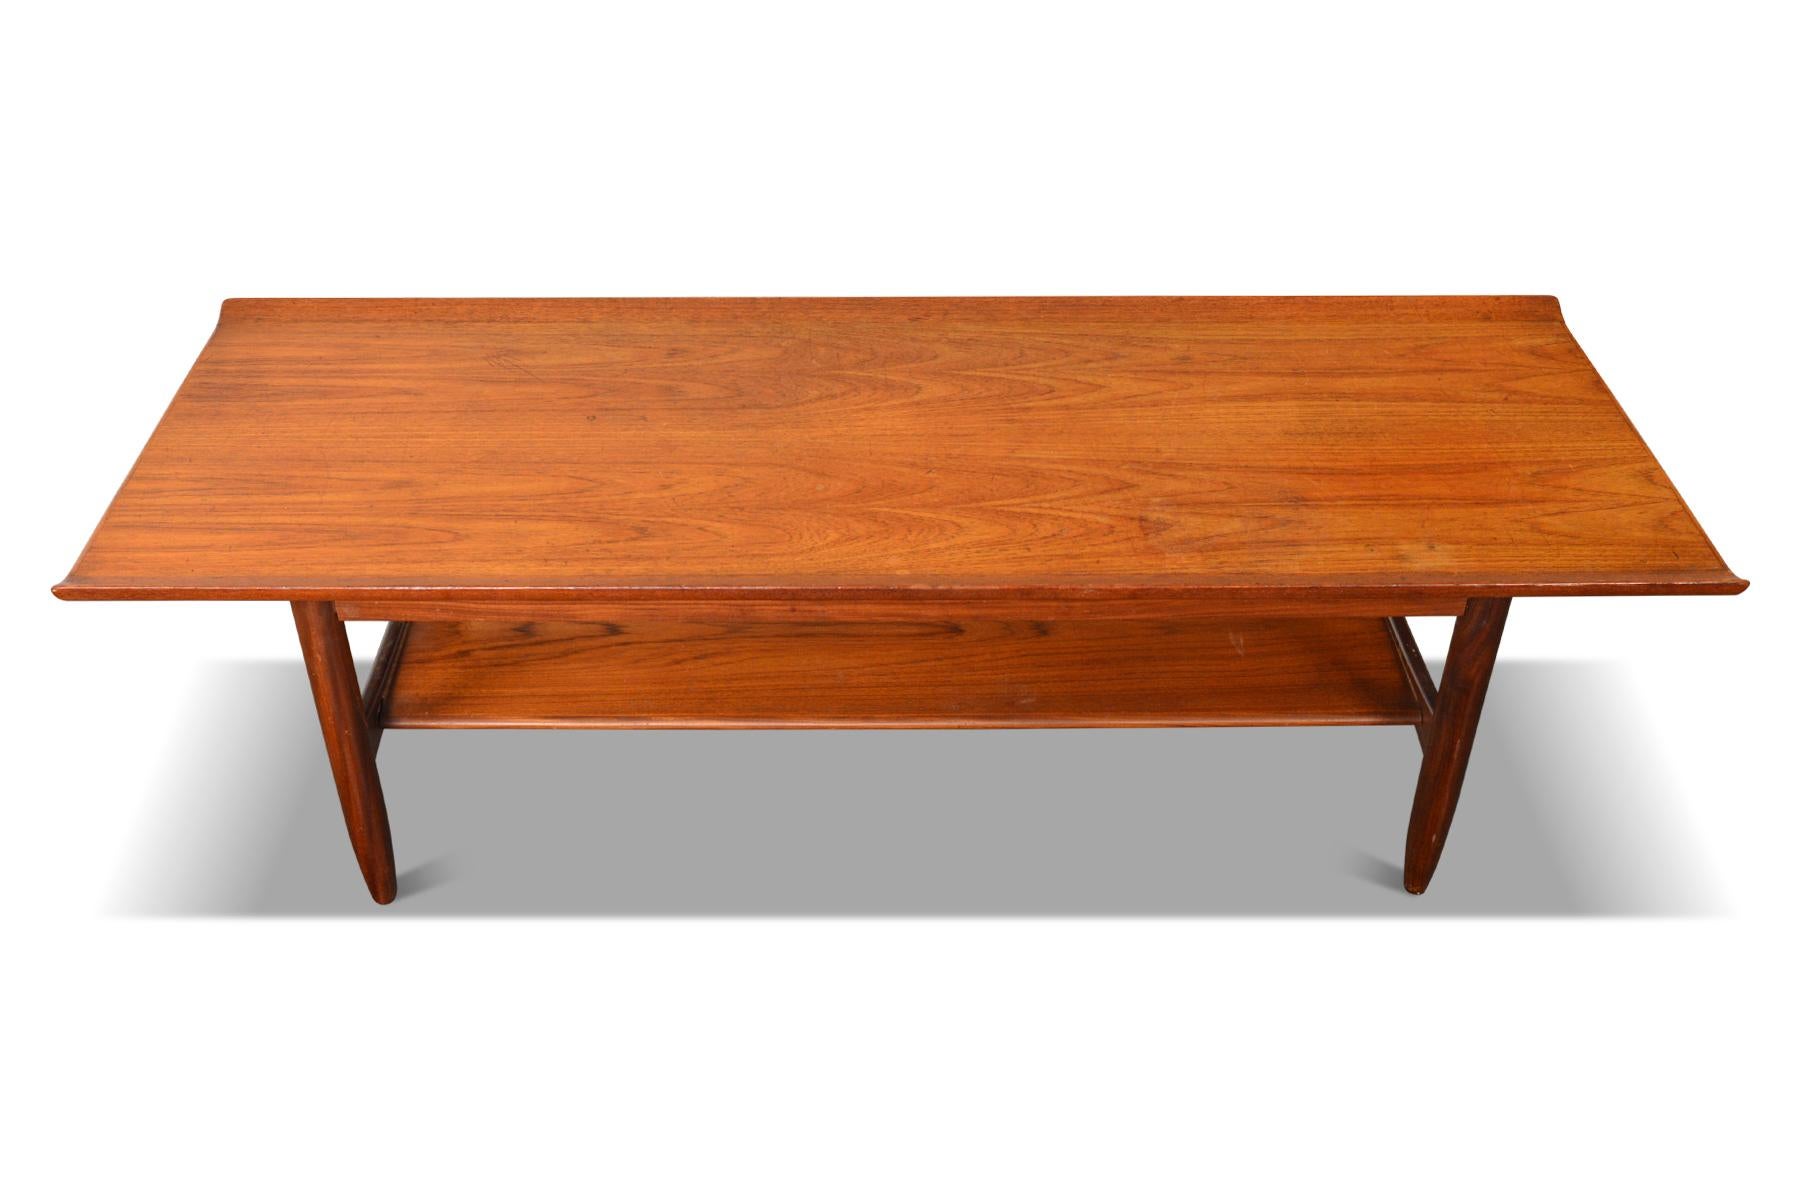 Origin: England
Designer: Unknown
Manufacturer: Unknown
Era: 1960s
Materials: Teak
Measurements: 60″ wide x 22″ deep x 18″ tall

Condition: In excellent original condition with typical wear for its vintage.  Price includes restoration / refinishing